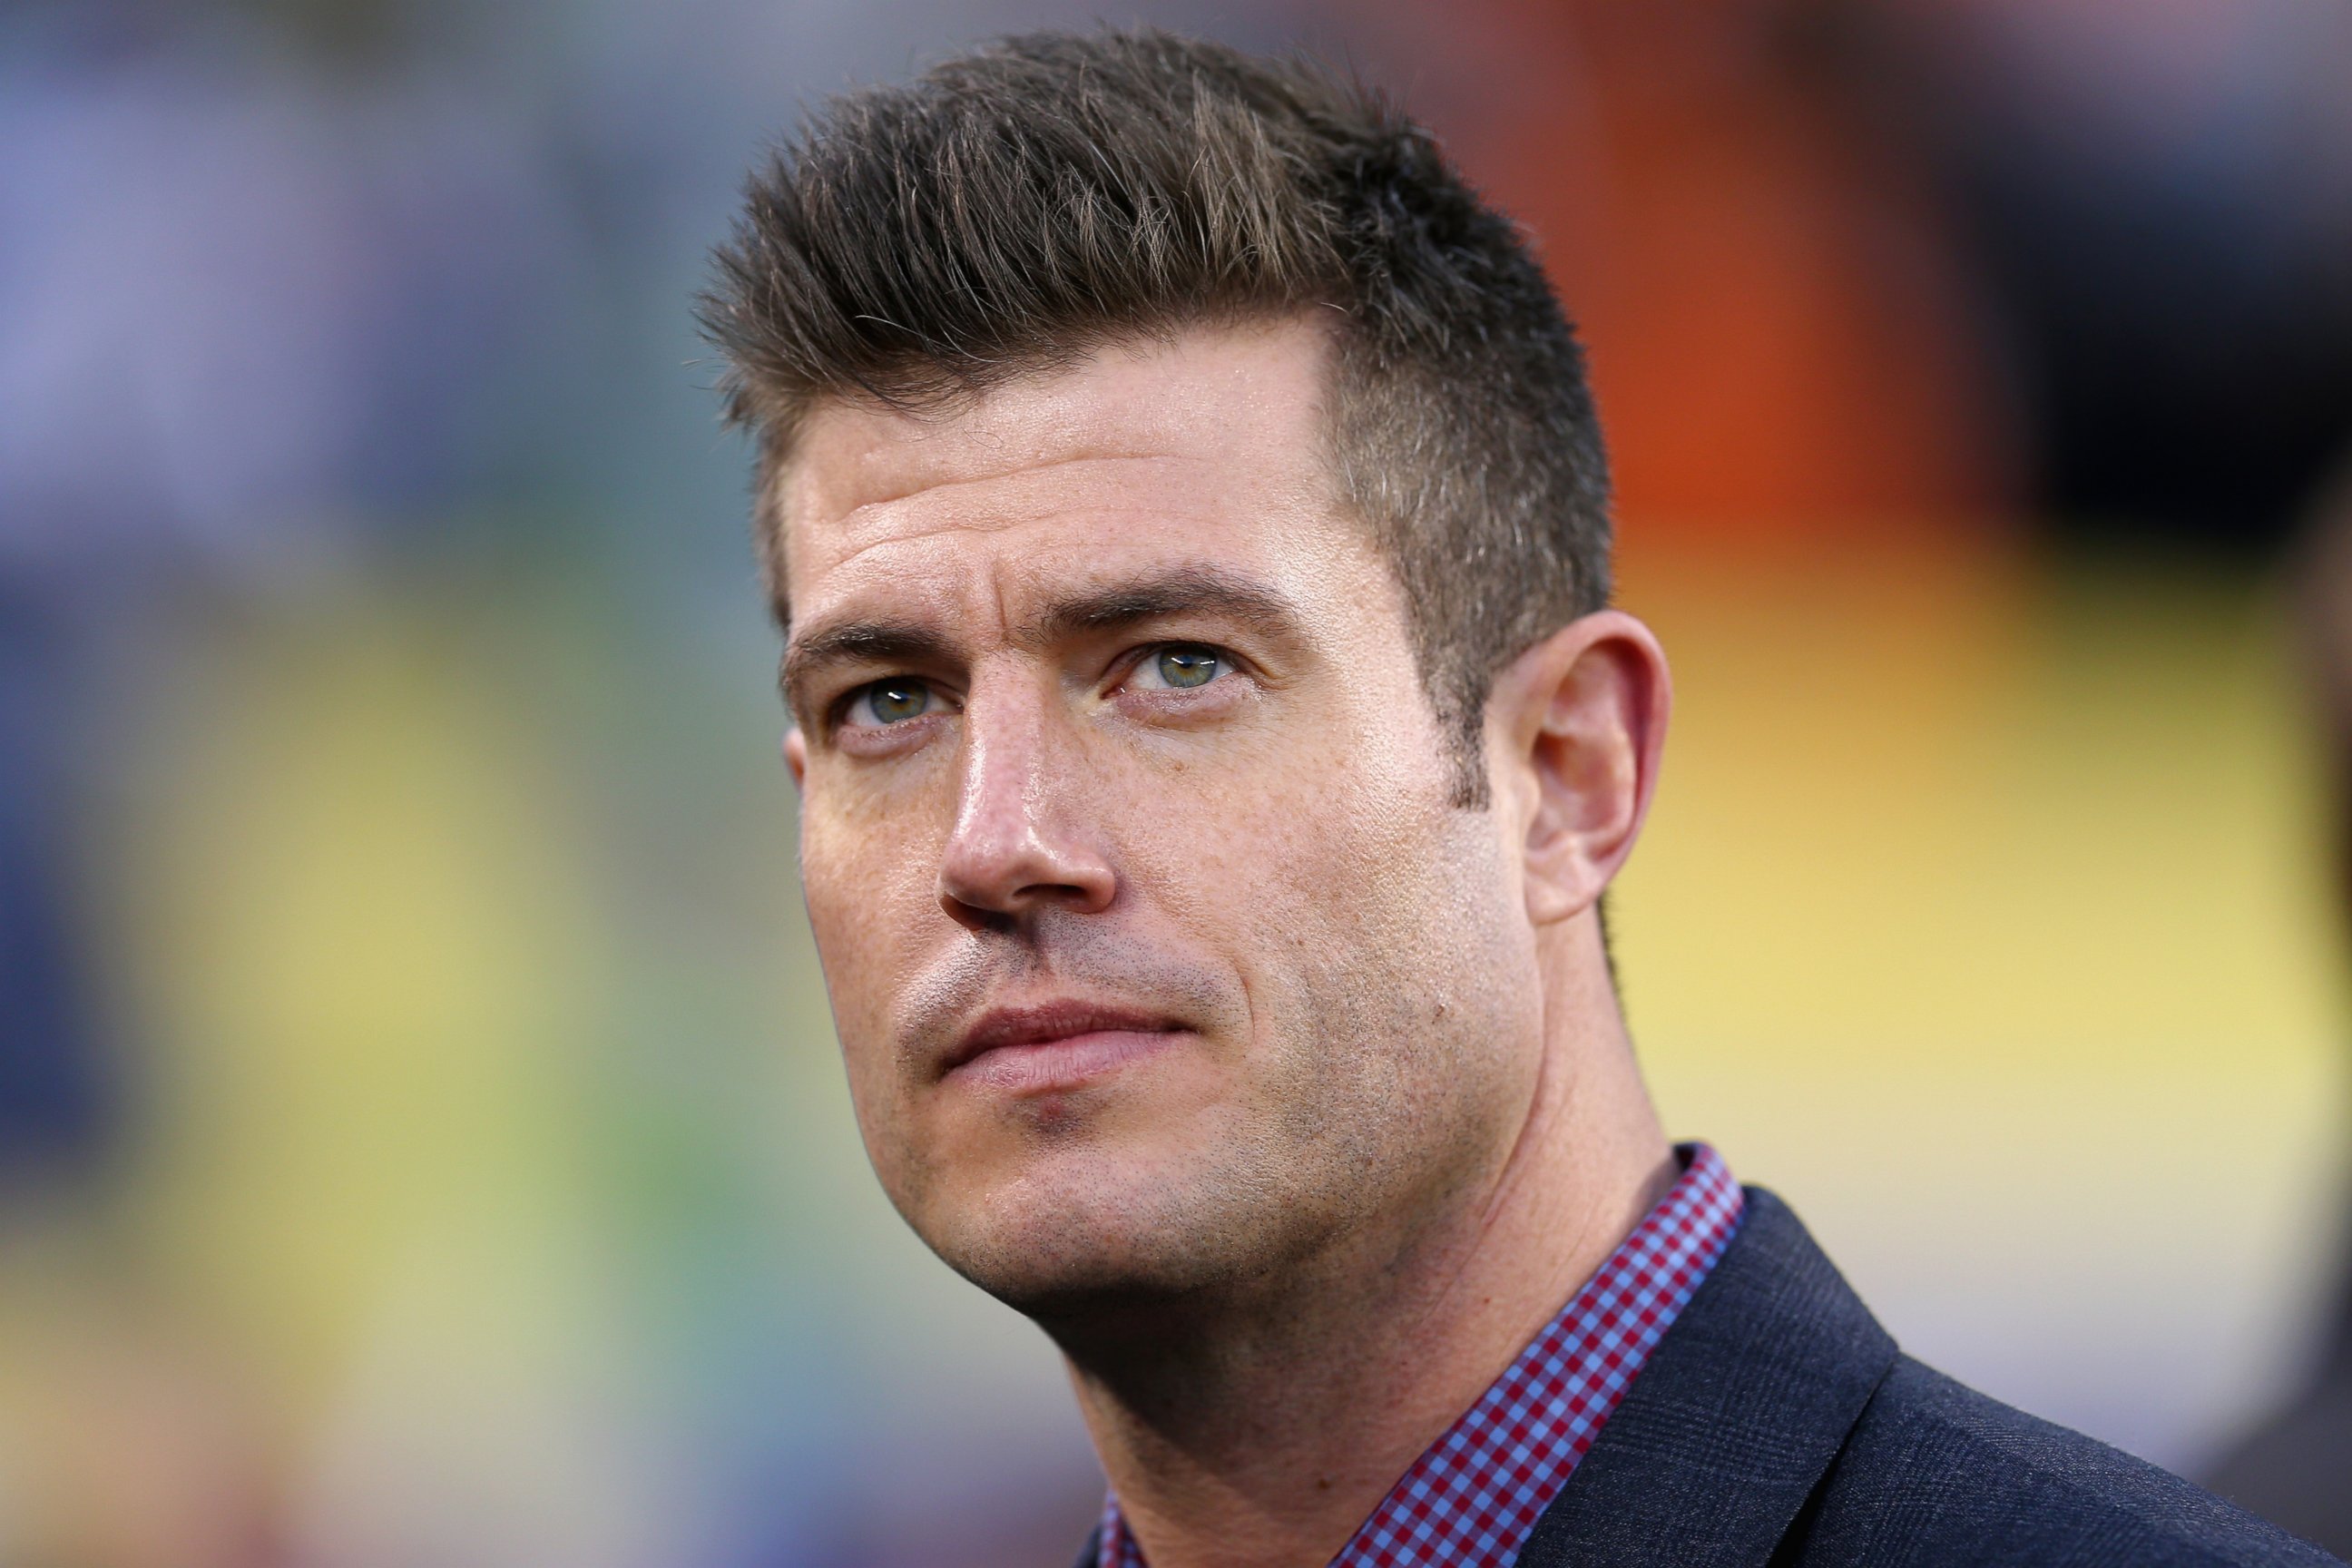 PHOTO: Sports commentator Jesse Palmer is shown prior to start of Super Bowl XLVIII at MetLife Stadium between the Denver Broncos and the Seattle Seahawks on Feb. 2, 2014, in East Rutherford, N.J.